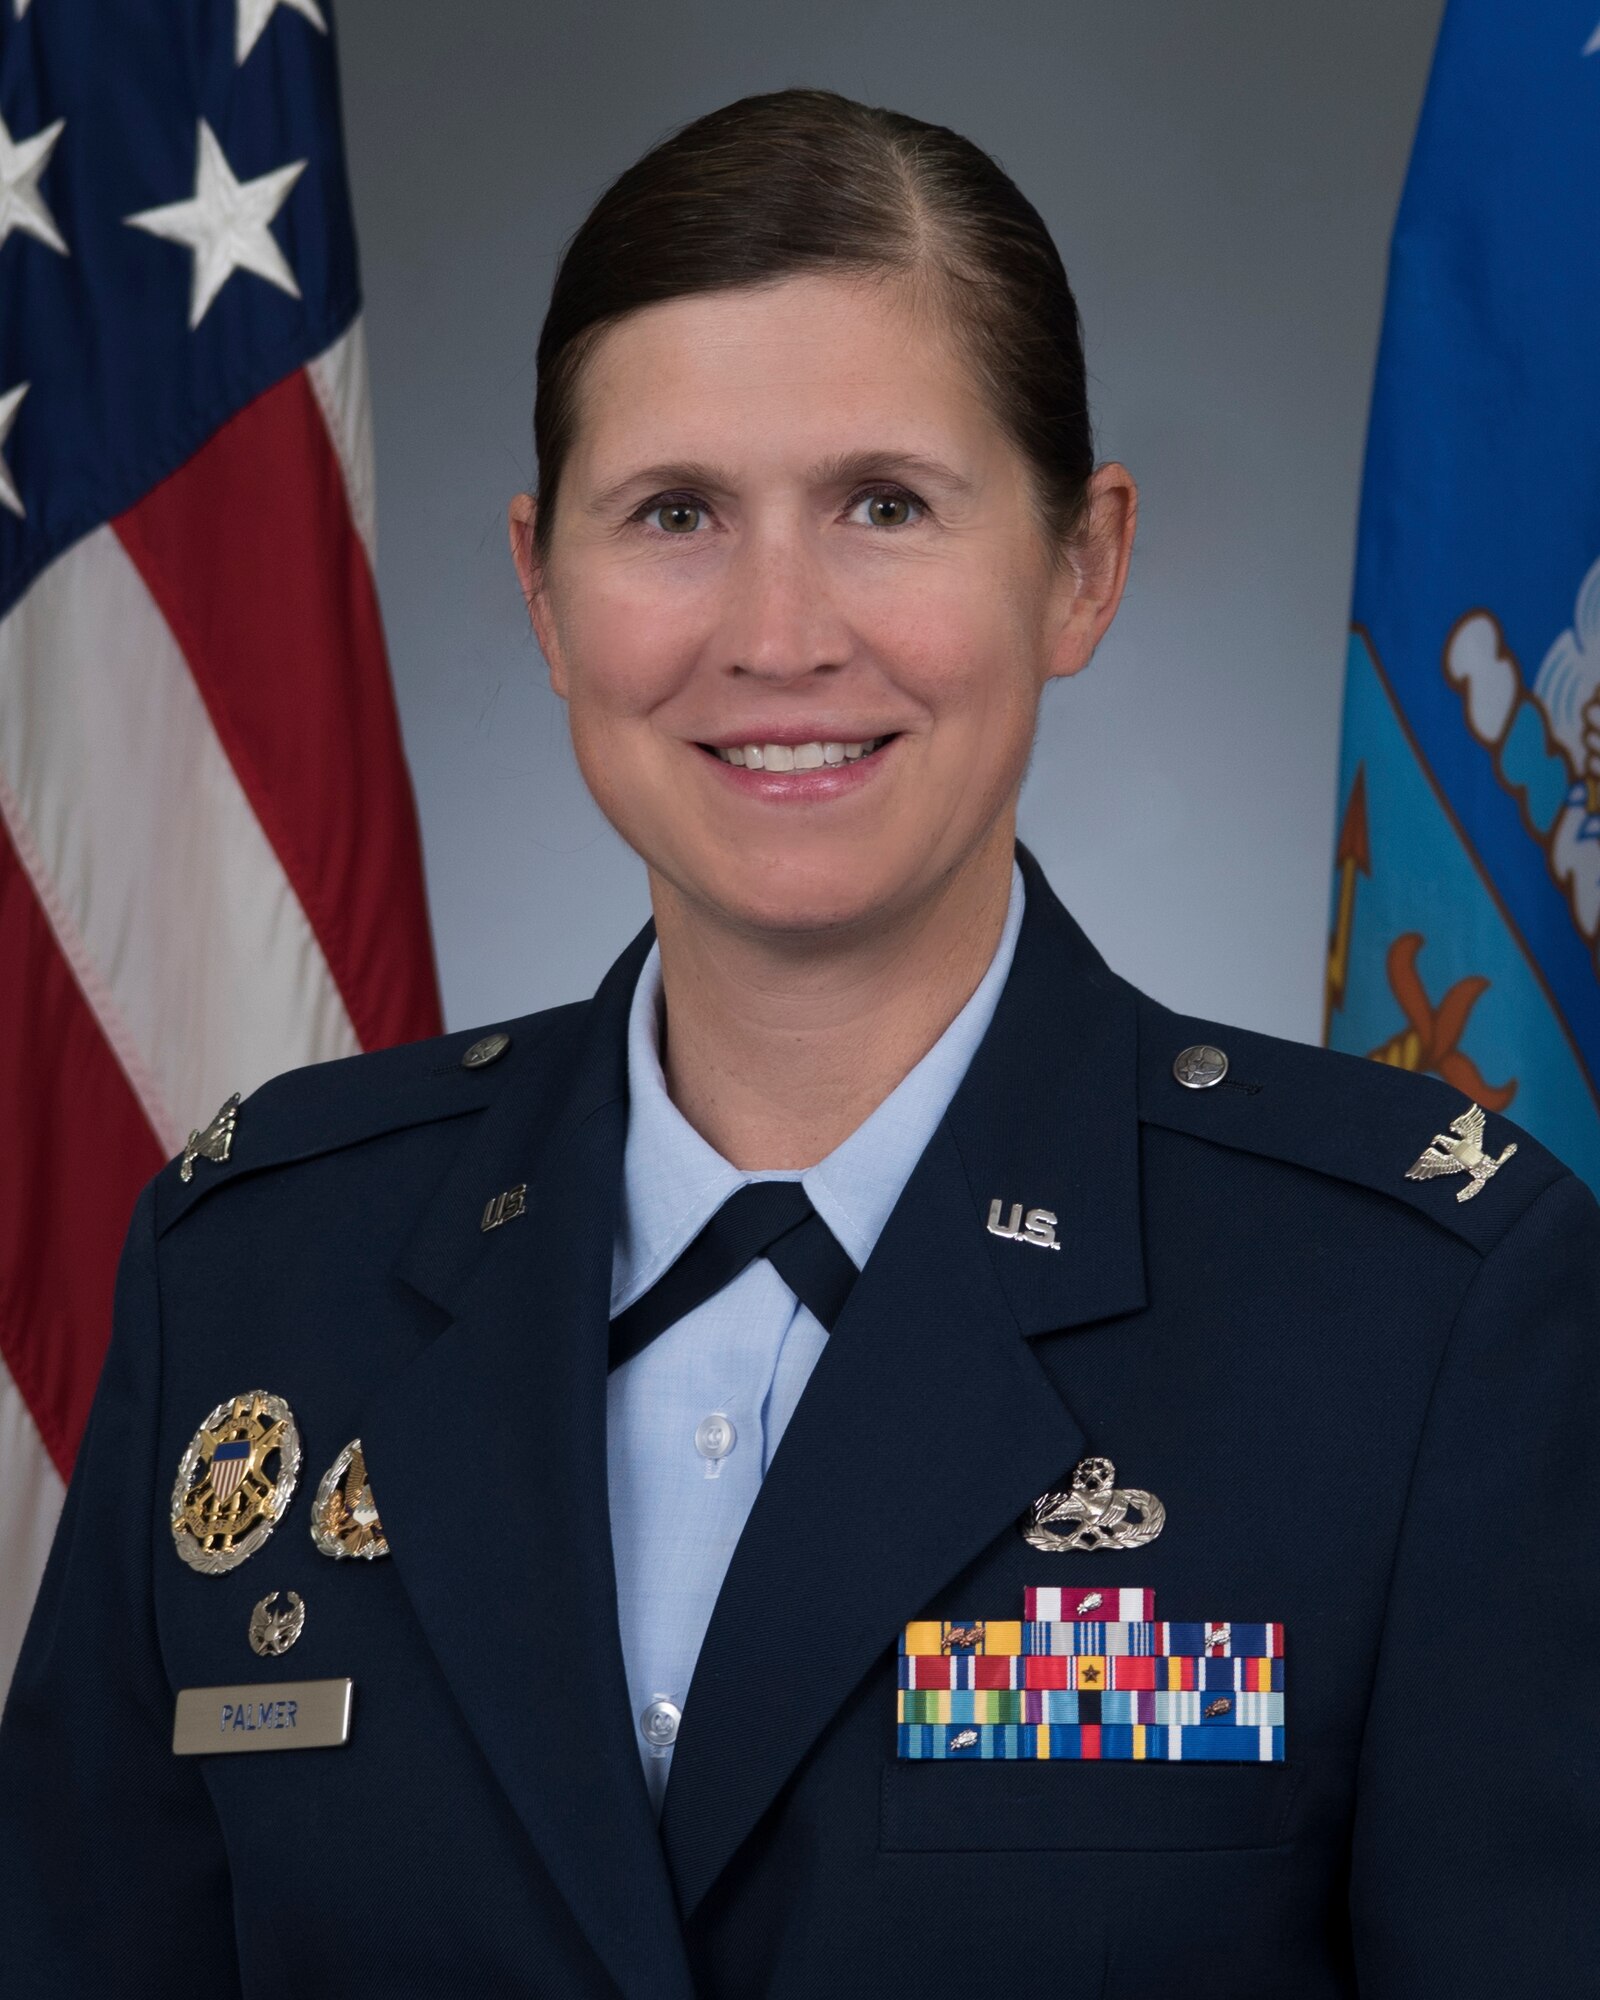 Official military photo of Col Kristen Palmer